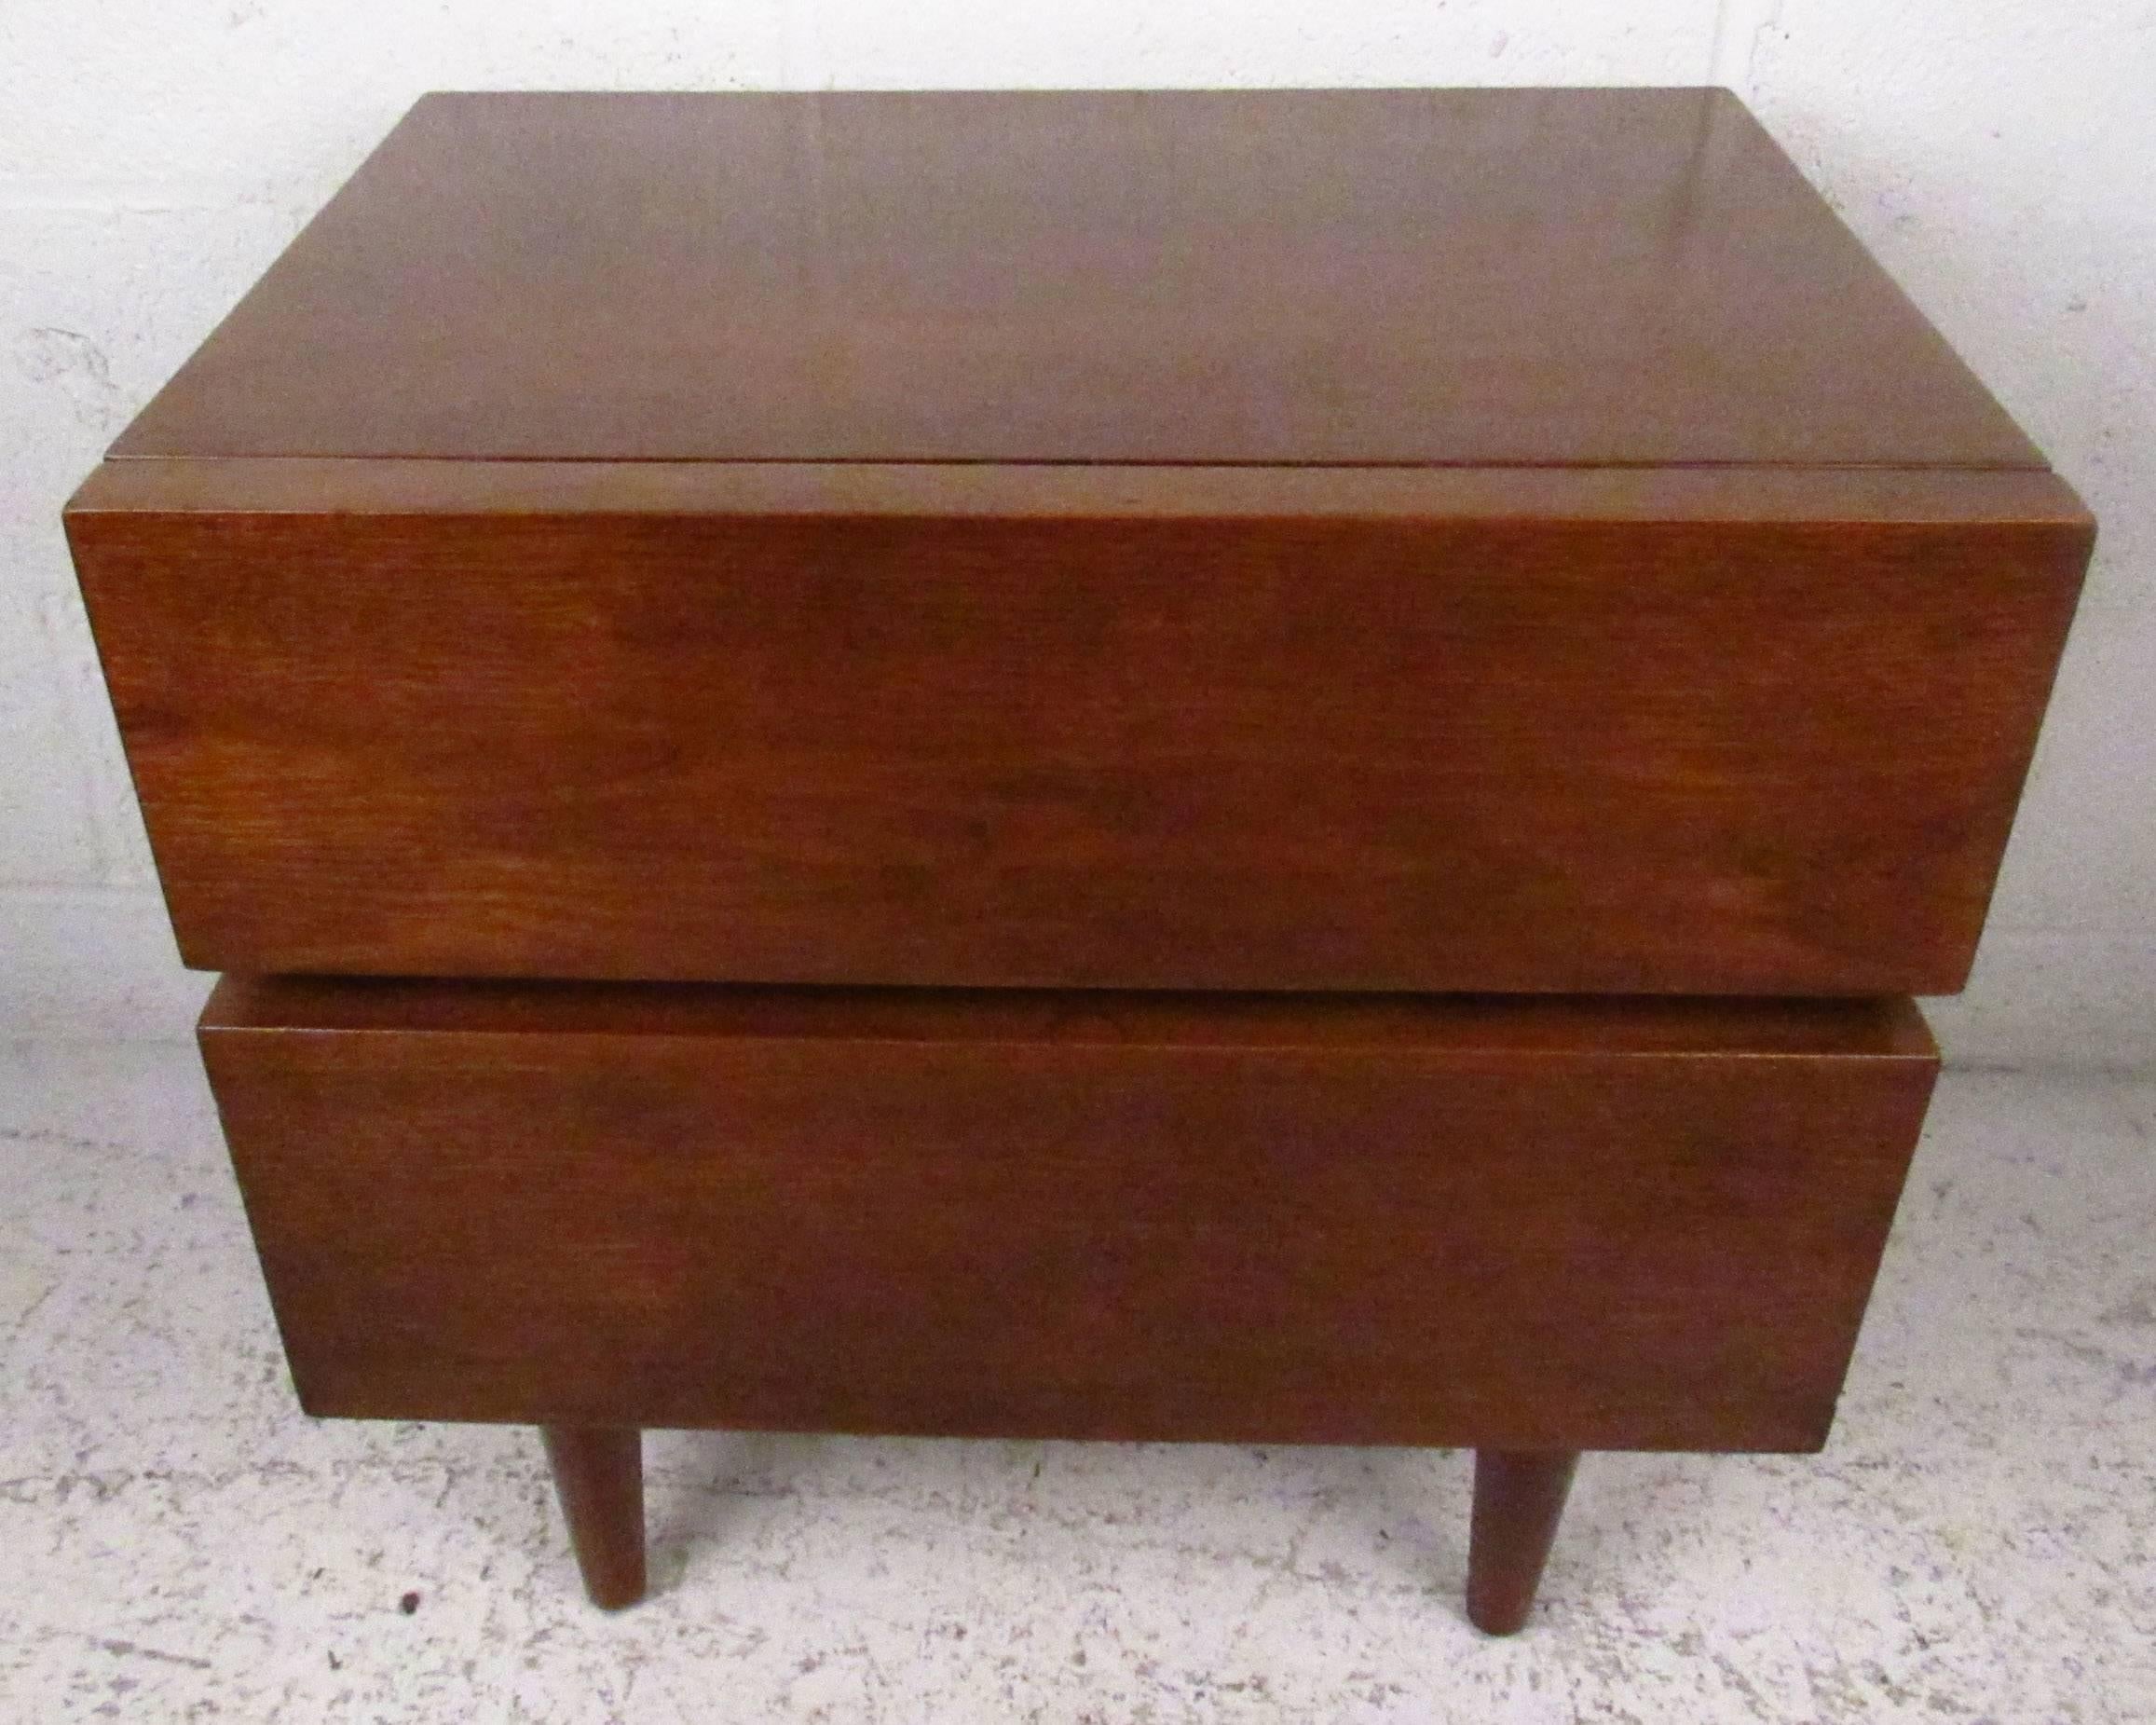 Vintage-modern nightstand, features two drawers and rich walnut grain throughout.

Please confirm item location NY or NJ with dealer.